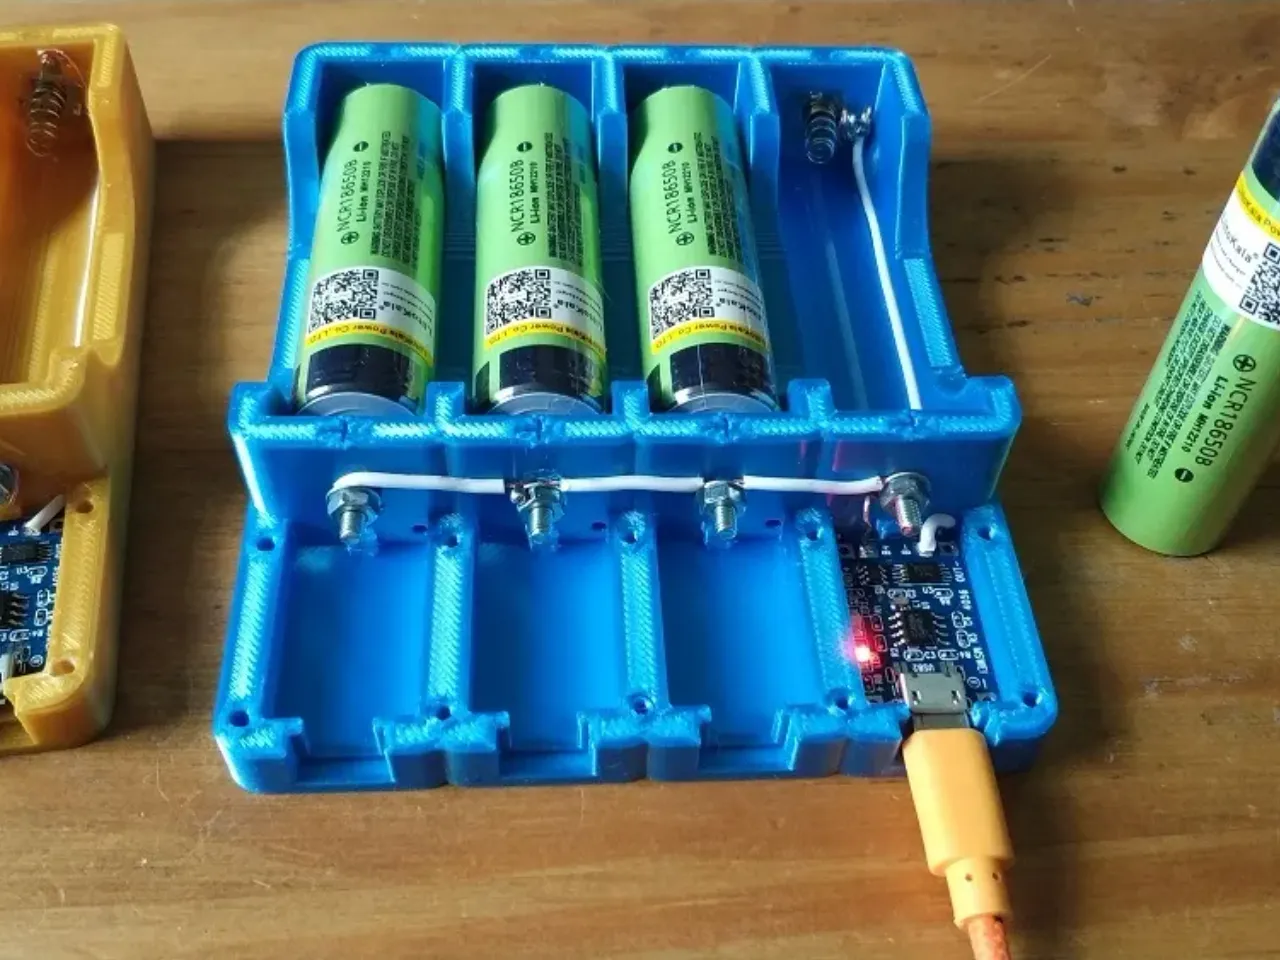 4x 18650 Multiple Battery Charger With